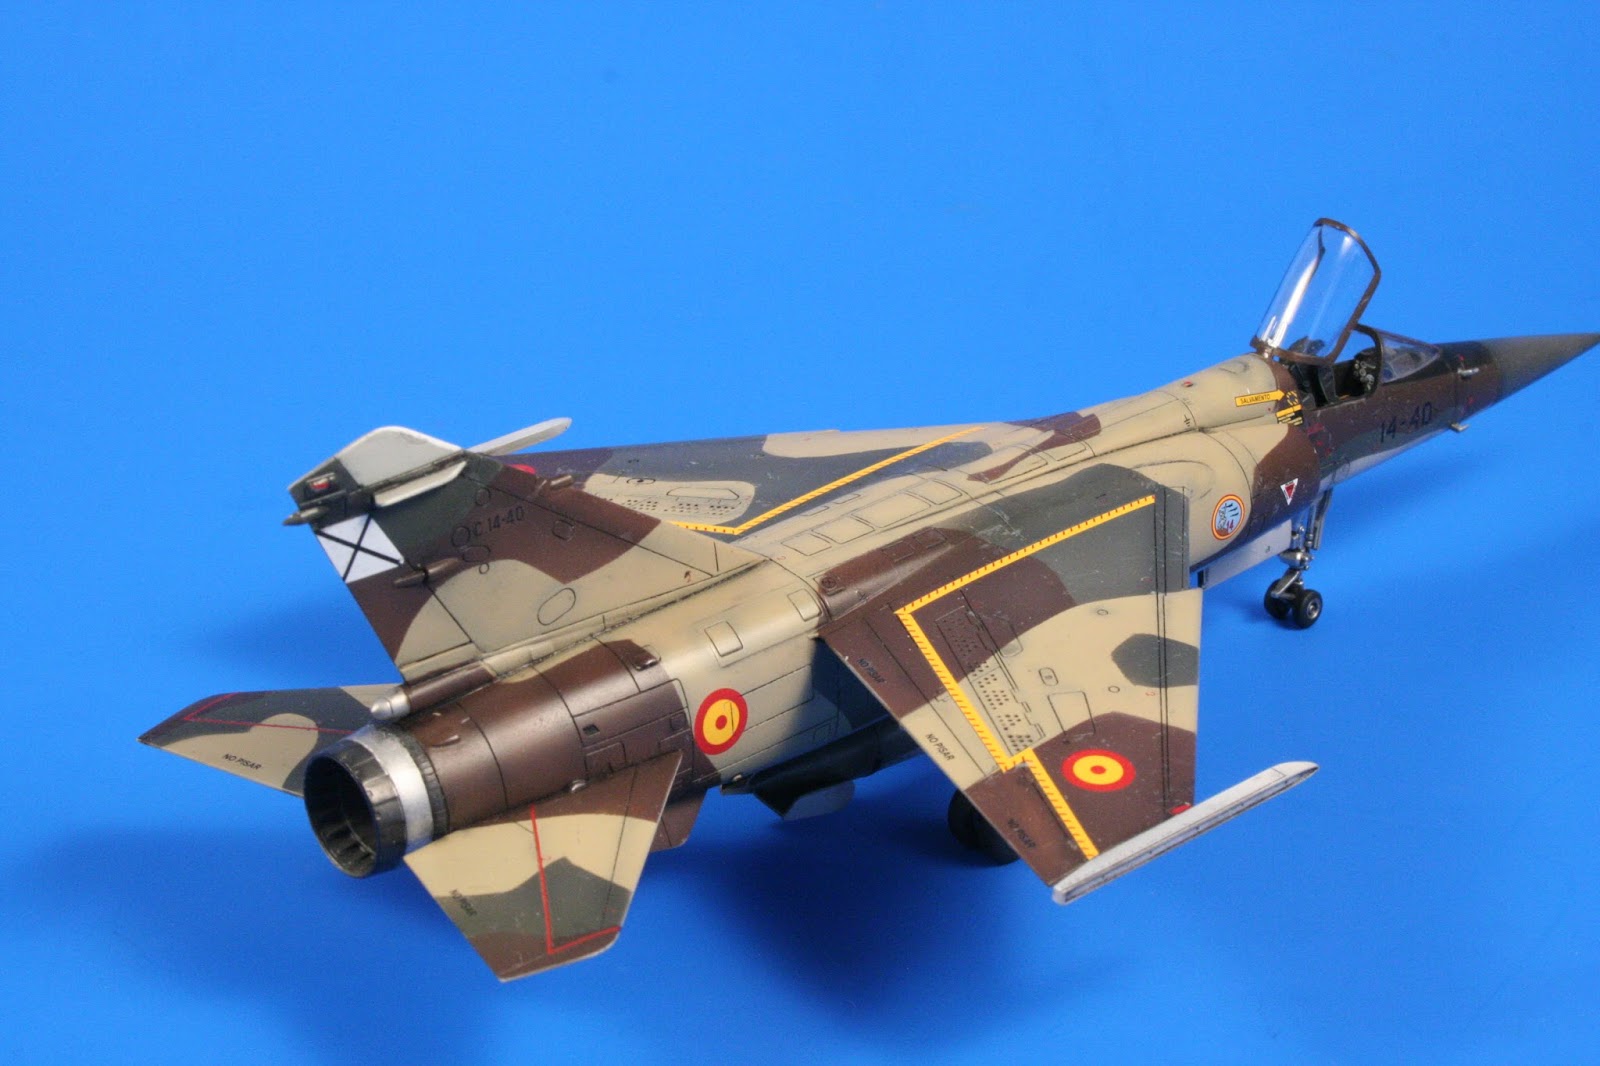 Ch ce. Mirage f1ce. Mirage f.1ce/Ch (Special Hobby sh72289). Mirage f1 minihobbymodels. Mirage f.1b/be (Special Hobby sh72291).